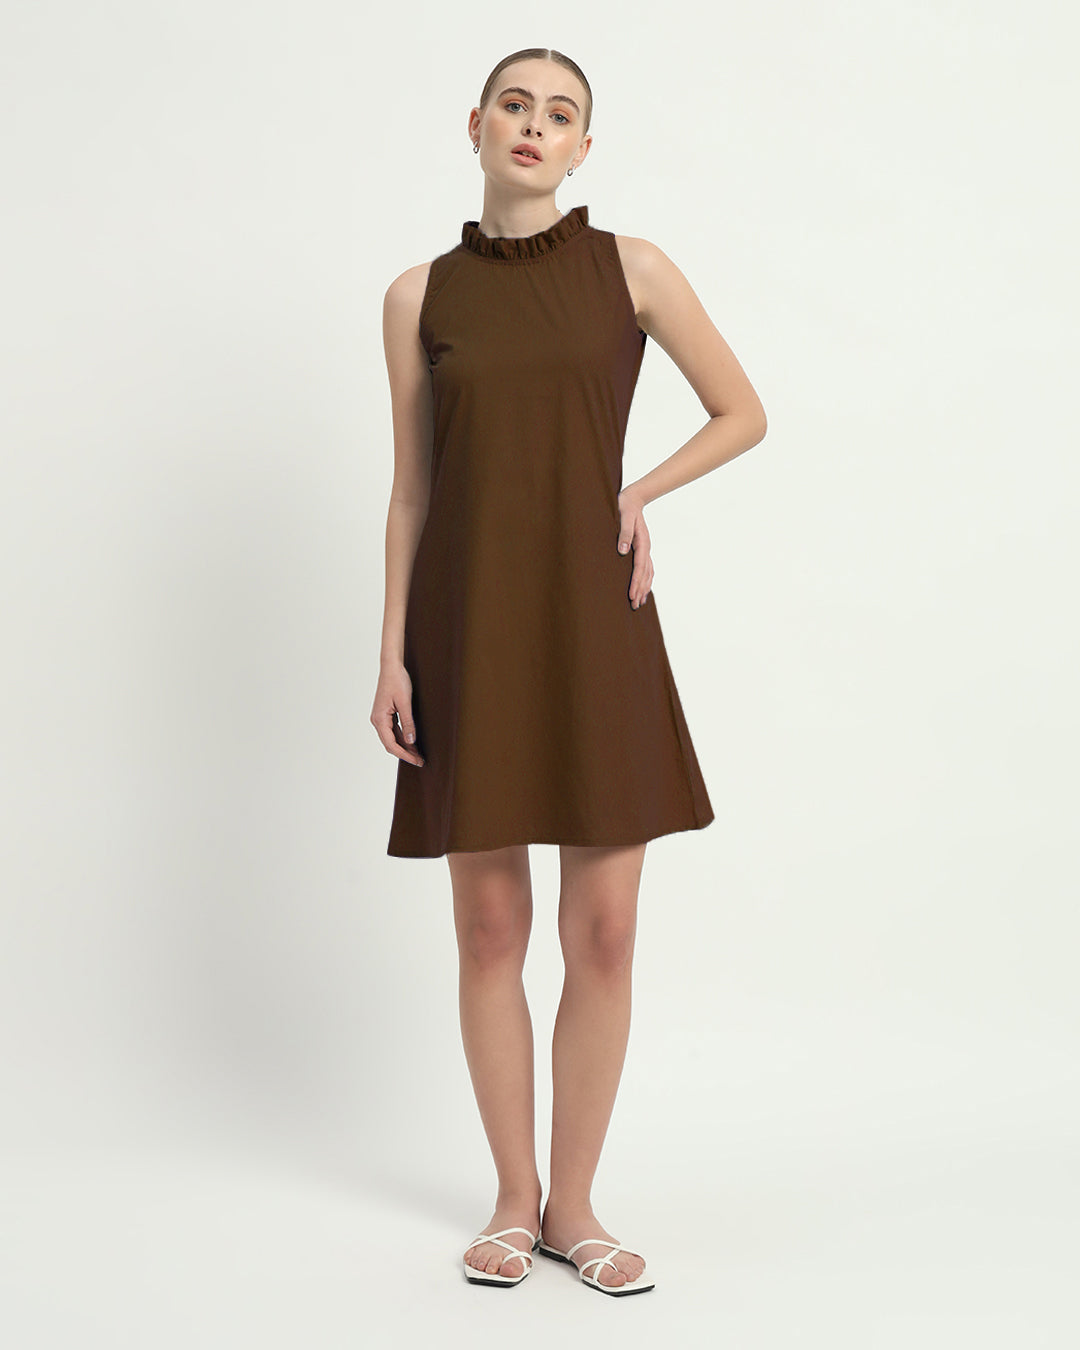 The Nutshell Angelica Cotton Dress